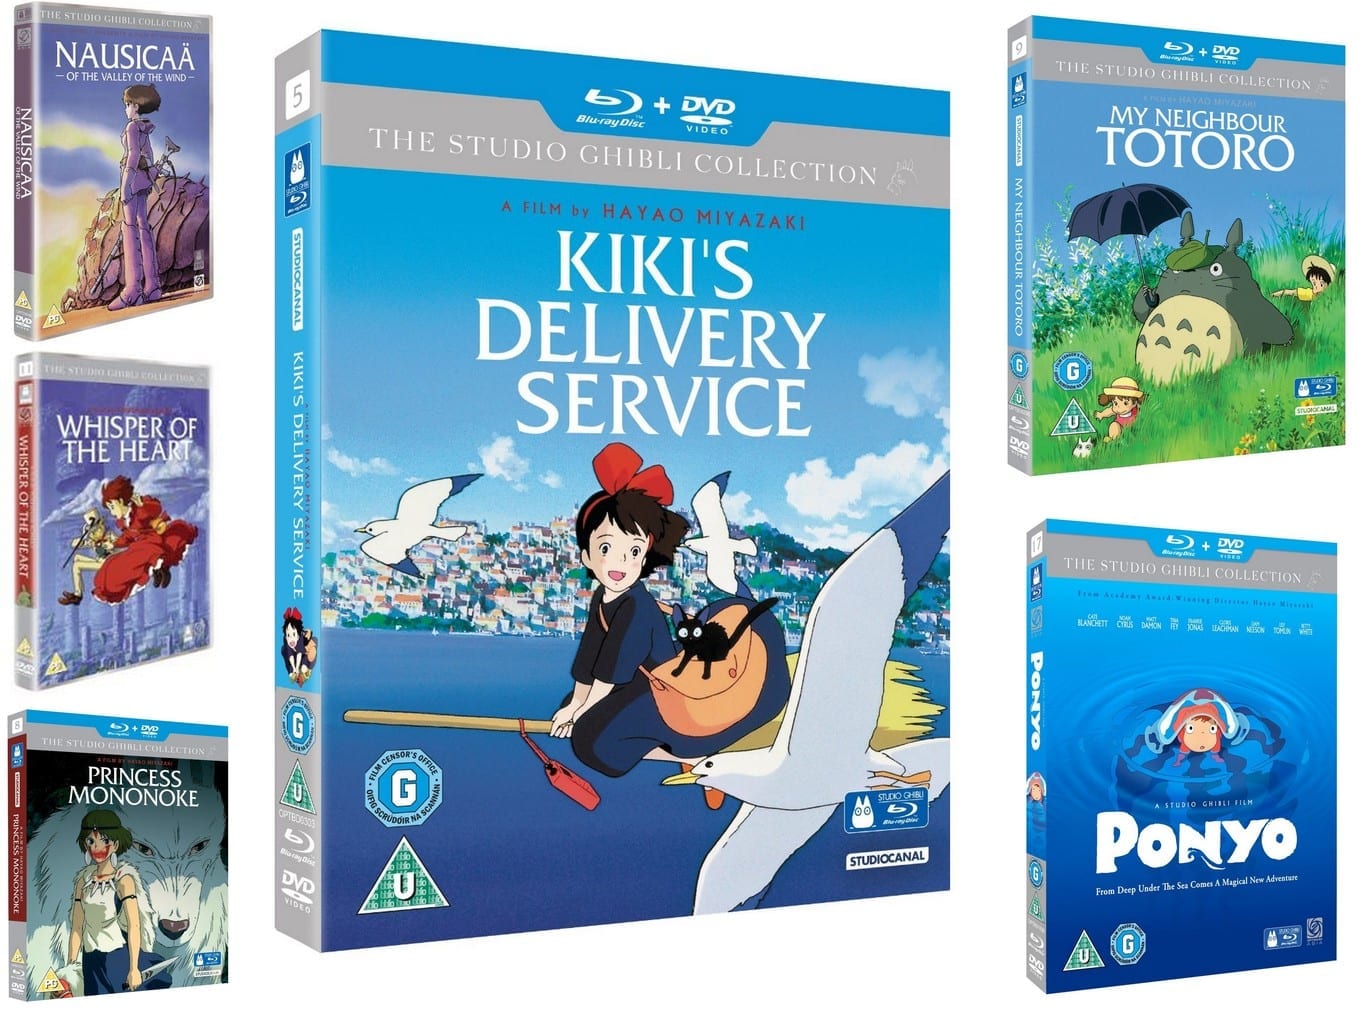 Studio Ghibli gift guide for girls FEATURED | Man vs. Pink